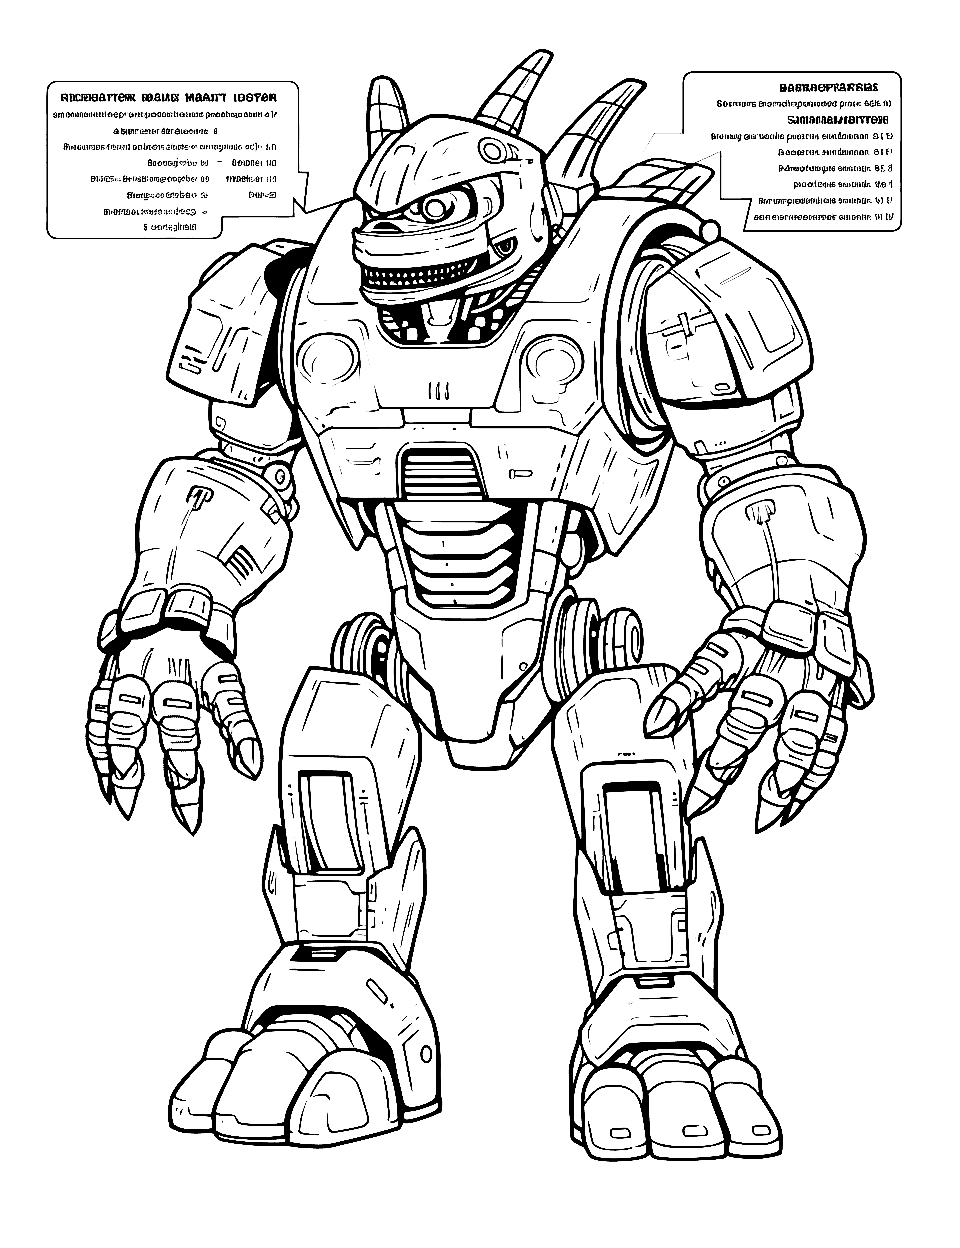 Robot Kaiju Blueprint Coloring Page - A schematic of a robot kaiju, showcasing its inner workings.